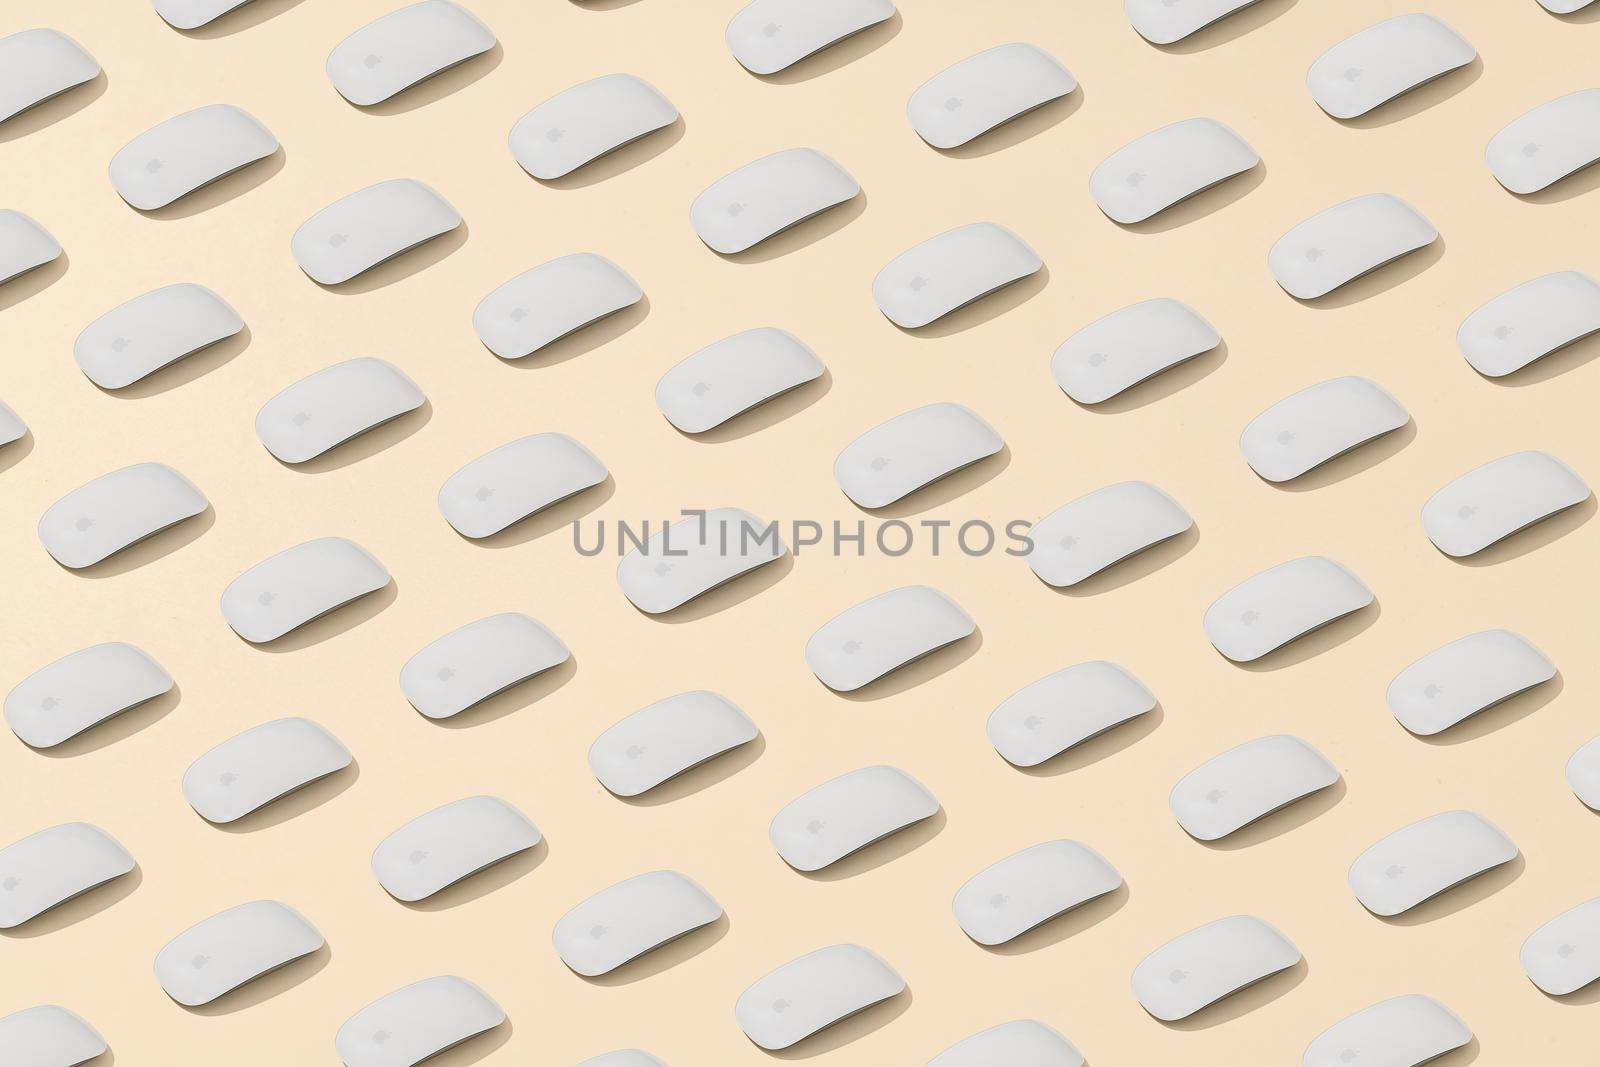 Antalya, Turkey - August 30, 2022: Apple magic mouse lined up isometric on a cream background